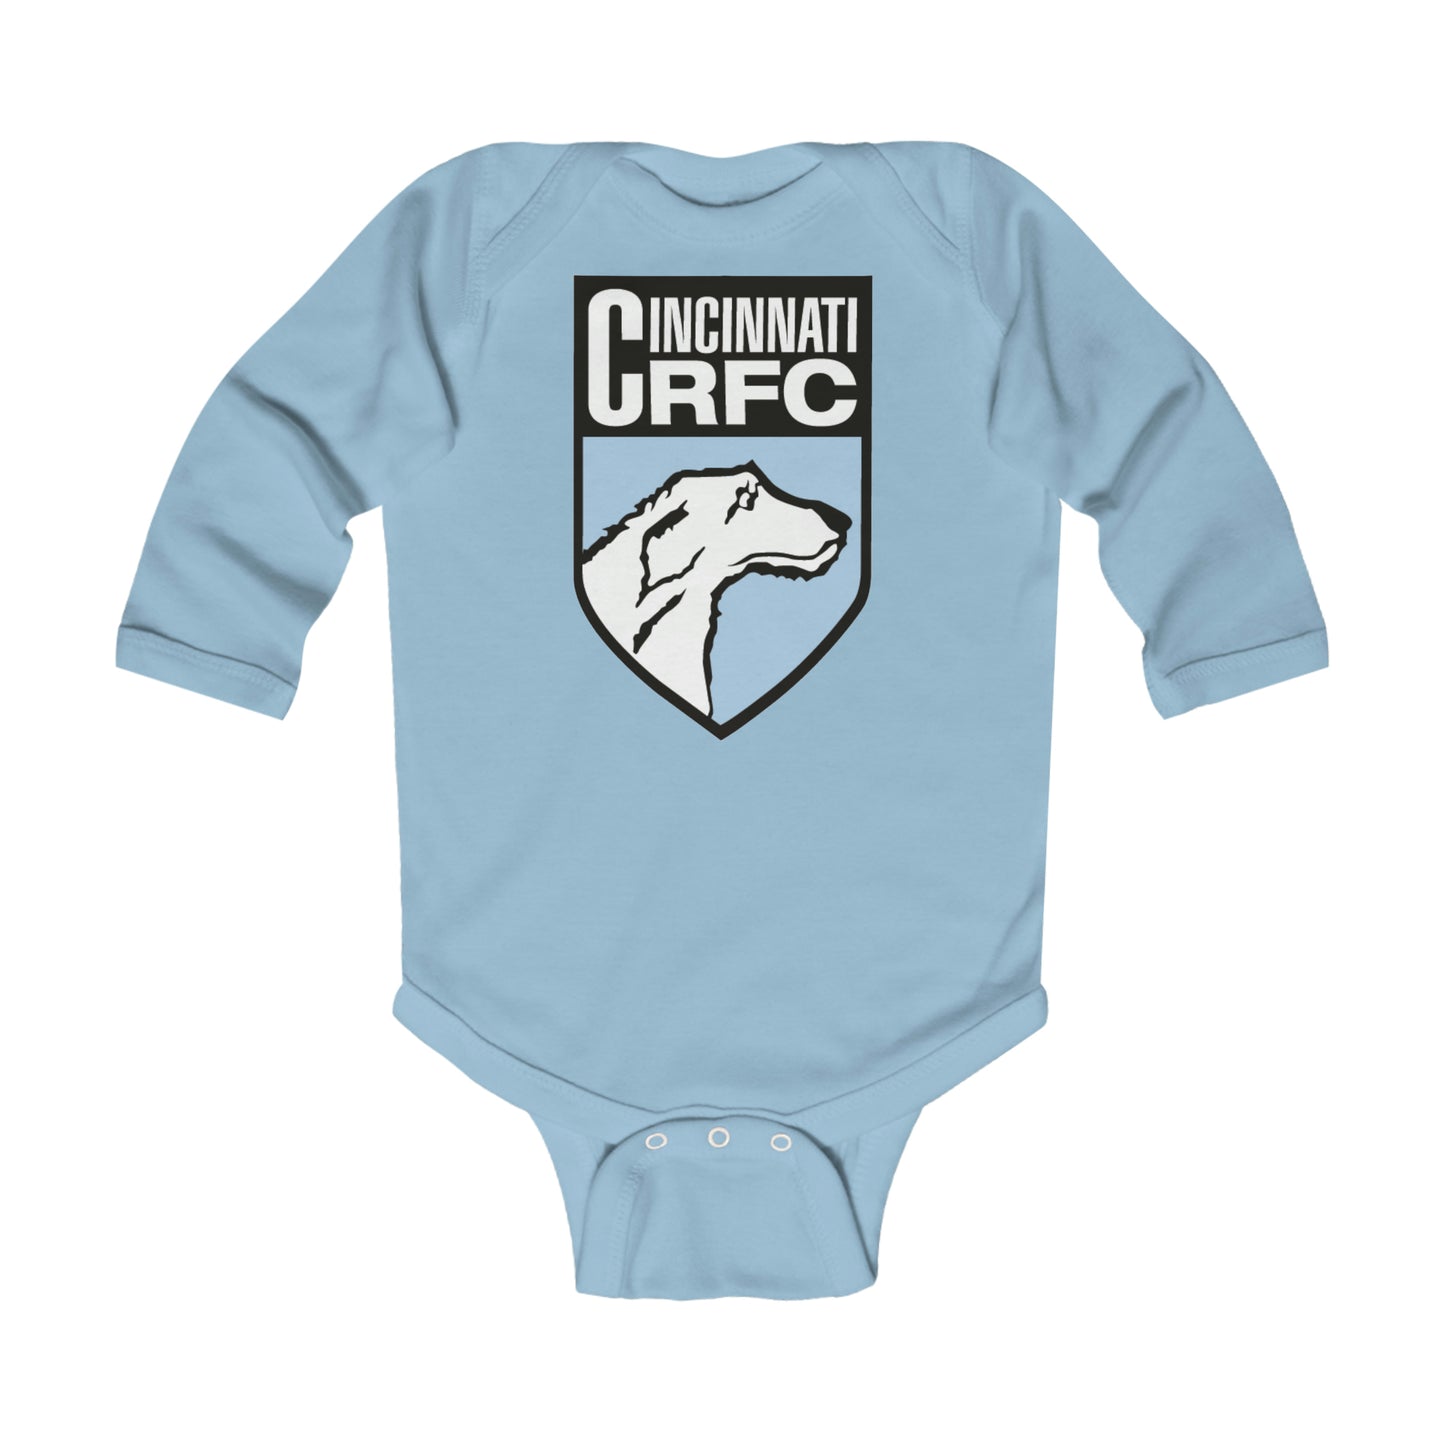 Infant Long Sleeve Onesie | CRFC Wolfhounds Blue Crest